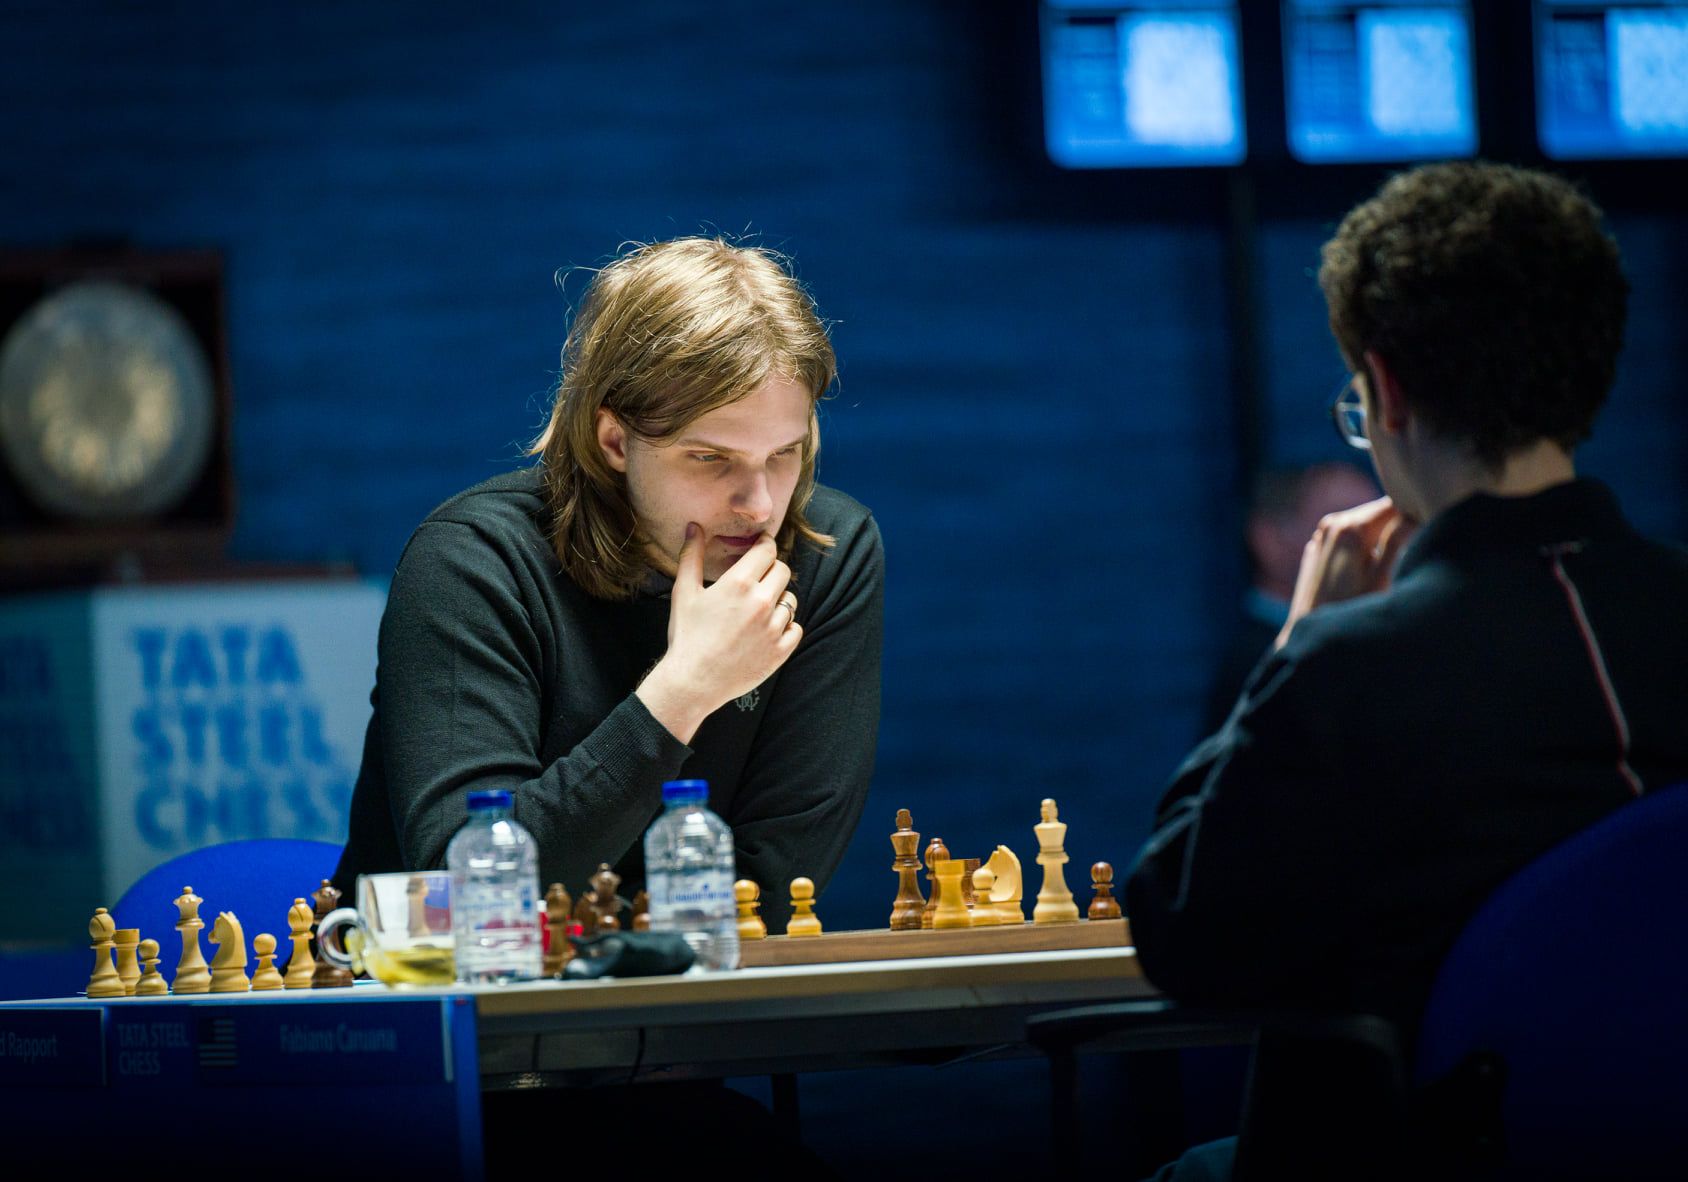 Event: Tata Steel Masters 2022 - Round 1 : r/chess